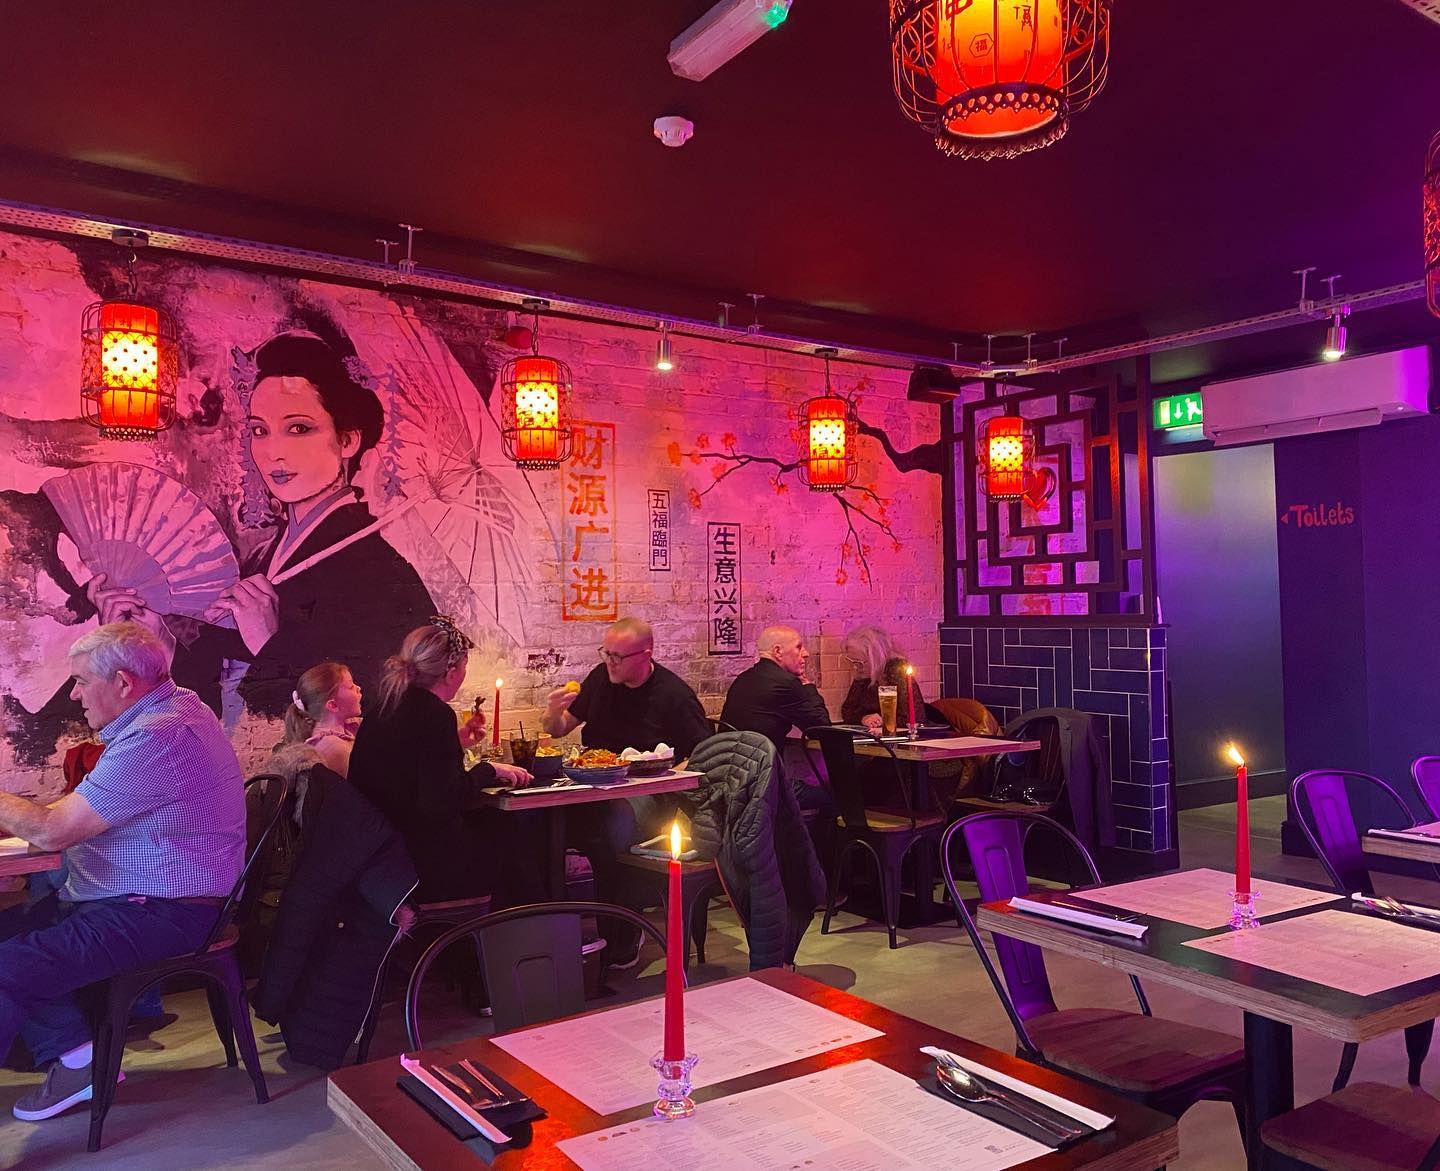 A new dim sum and roasted meats kitchen is opening in Manchester, The Manc